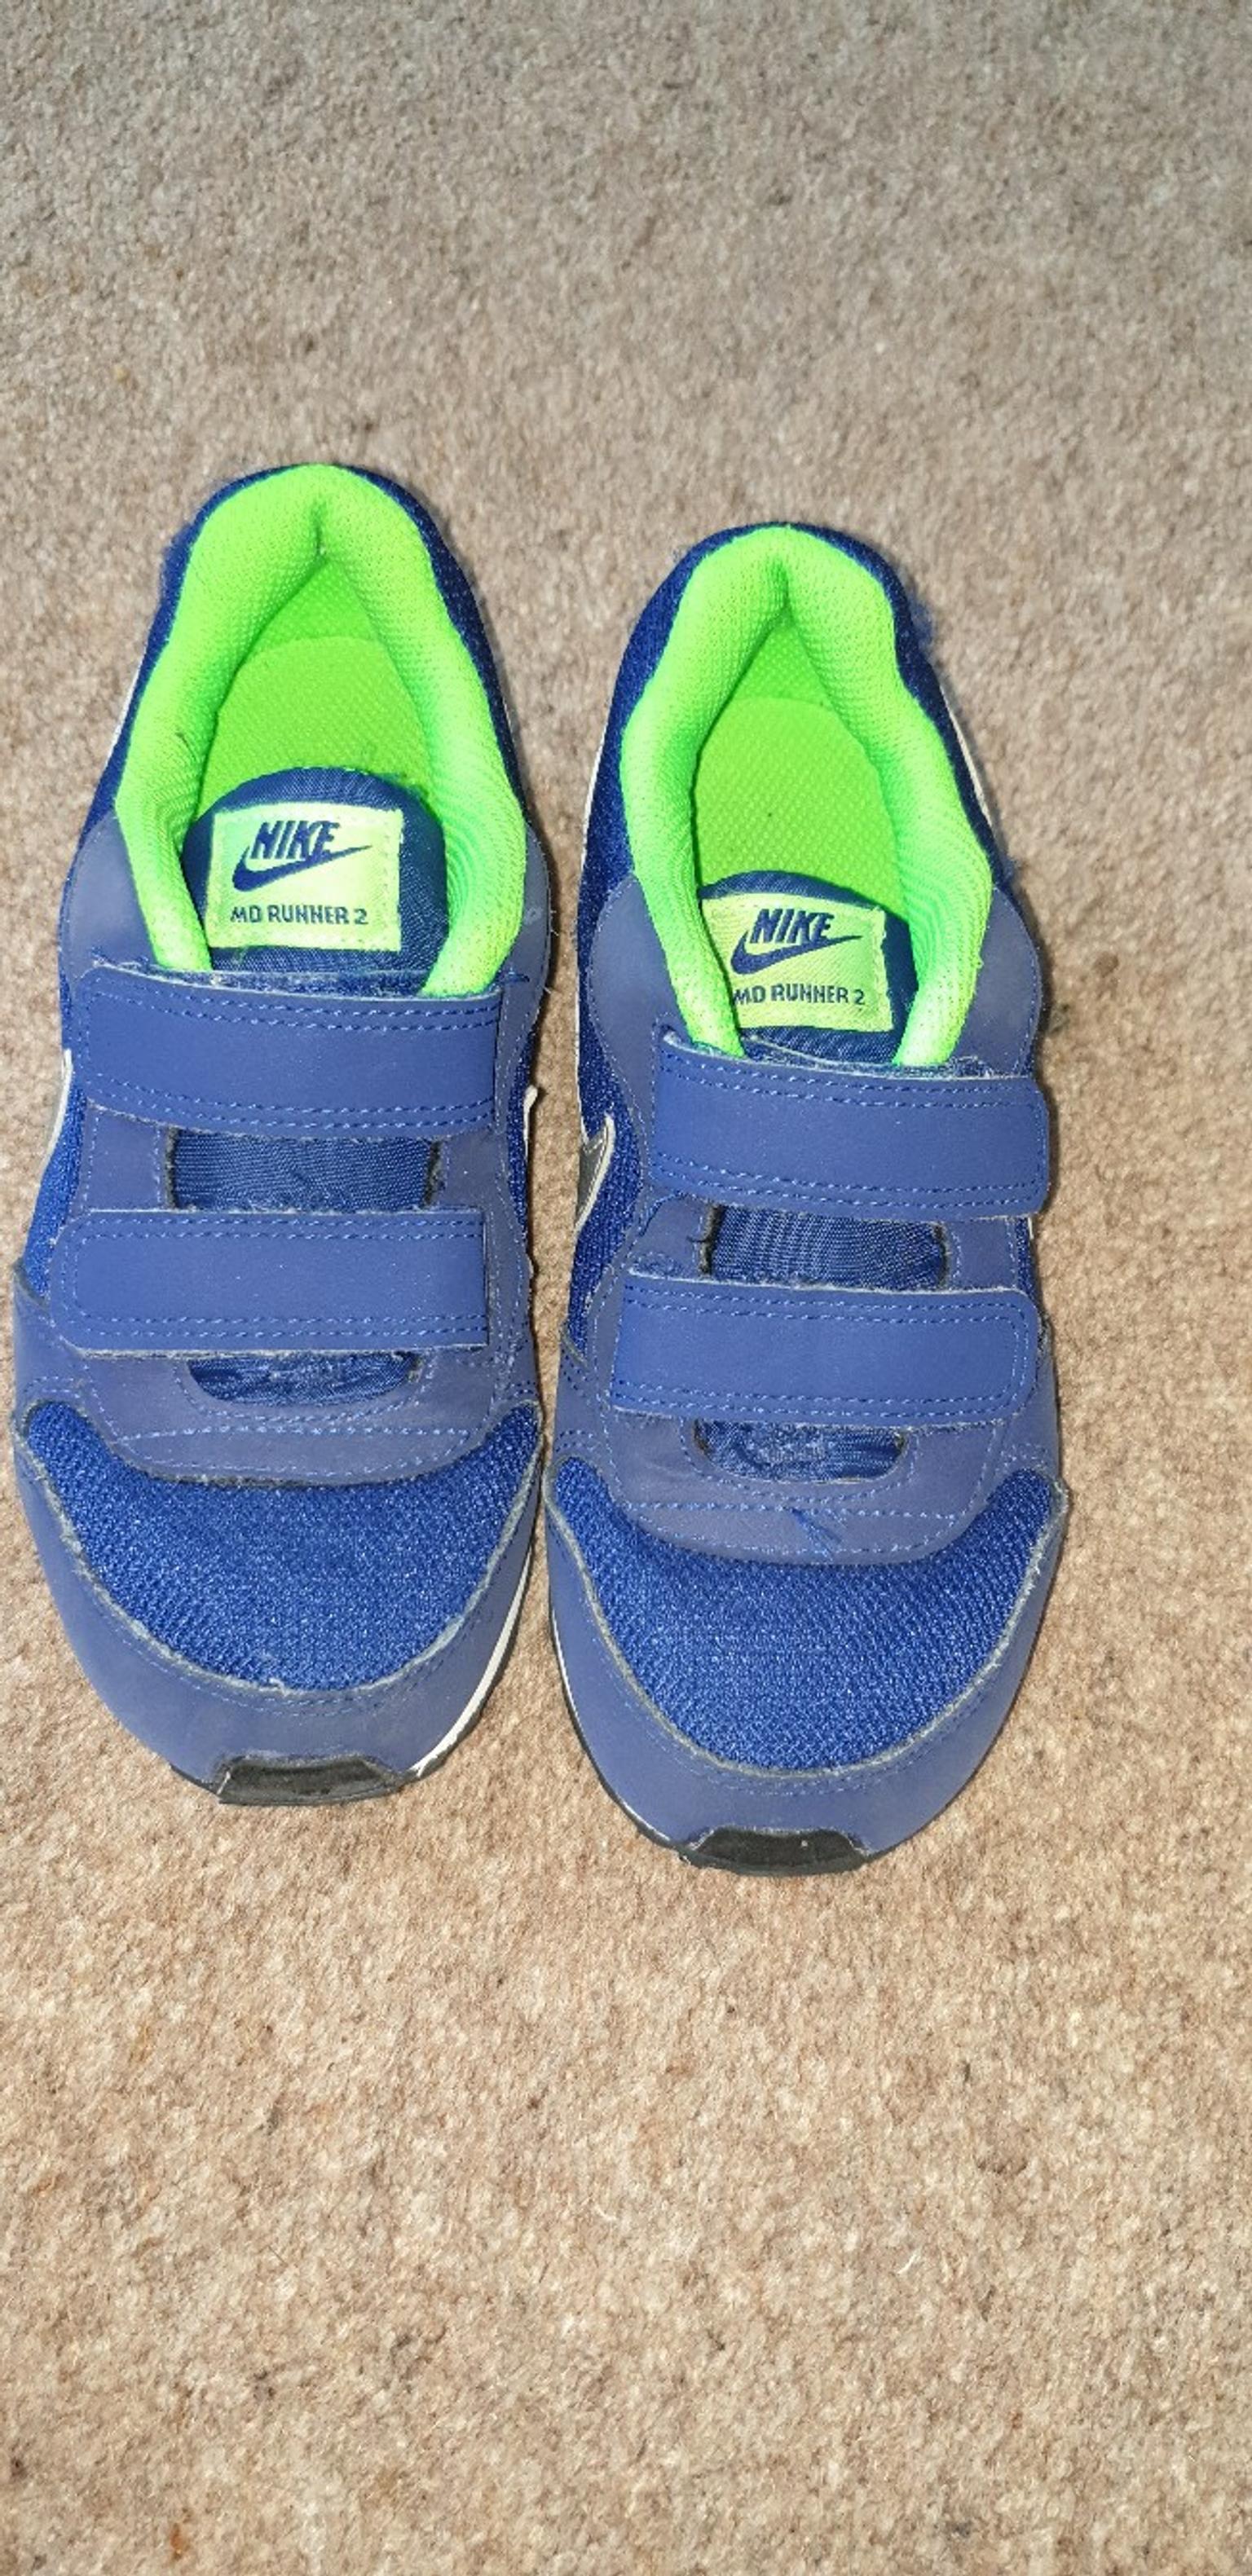 childrens nike trainers size 10